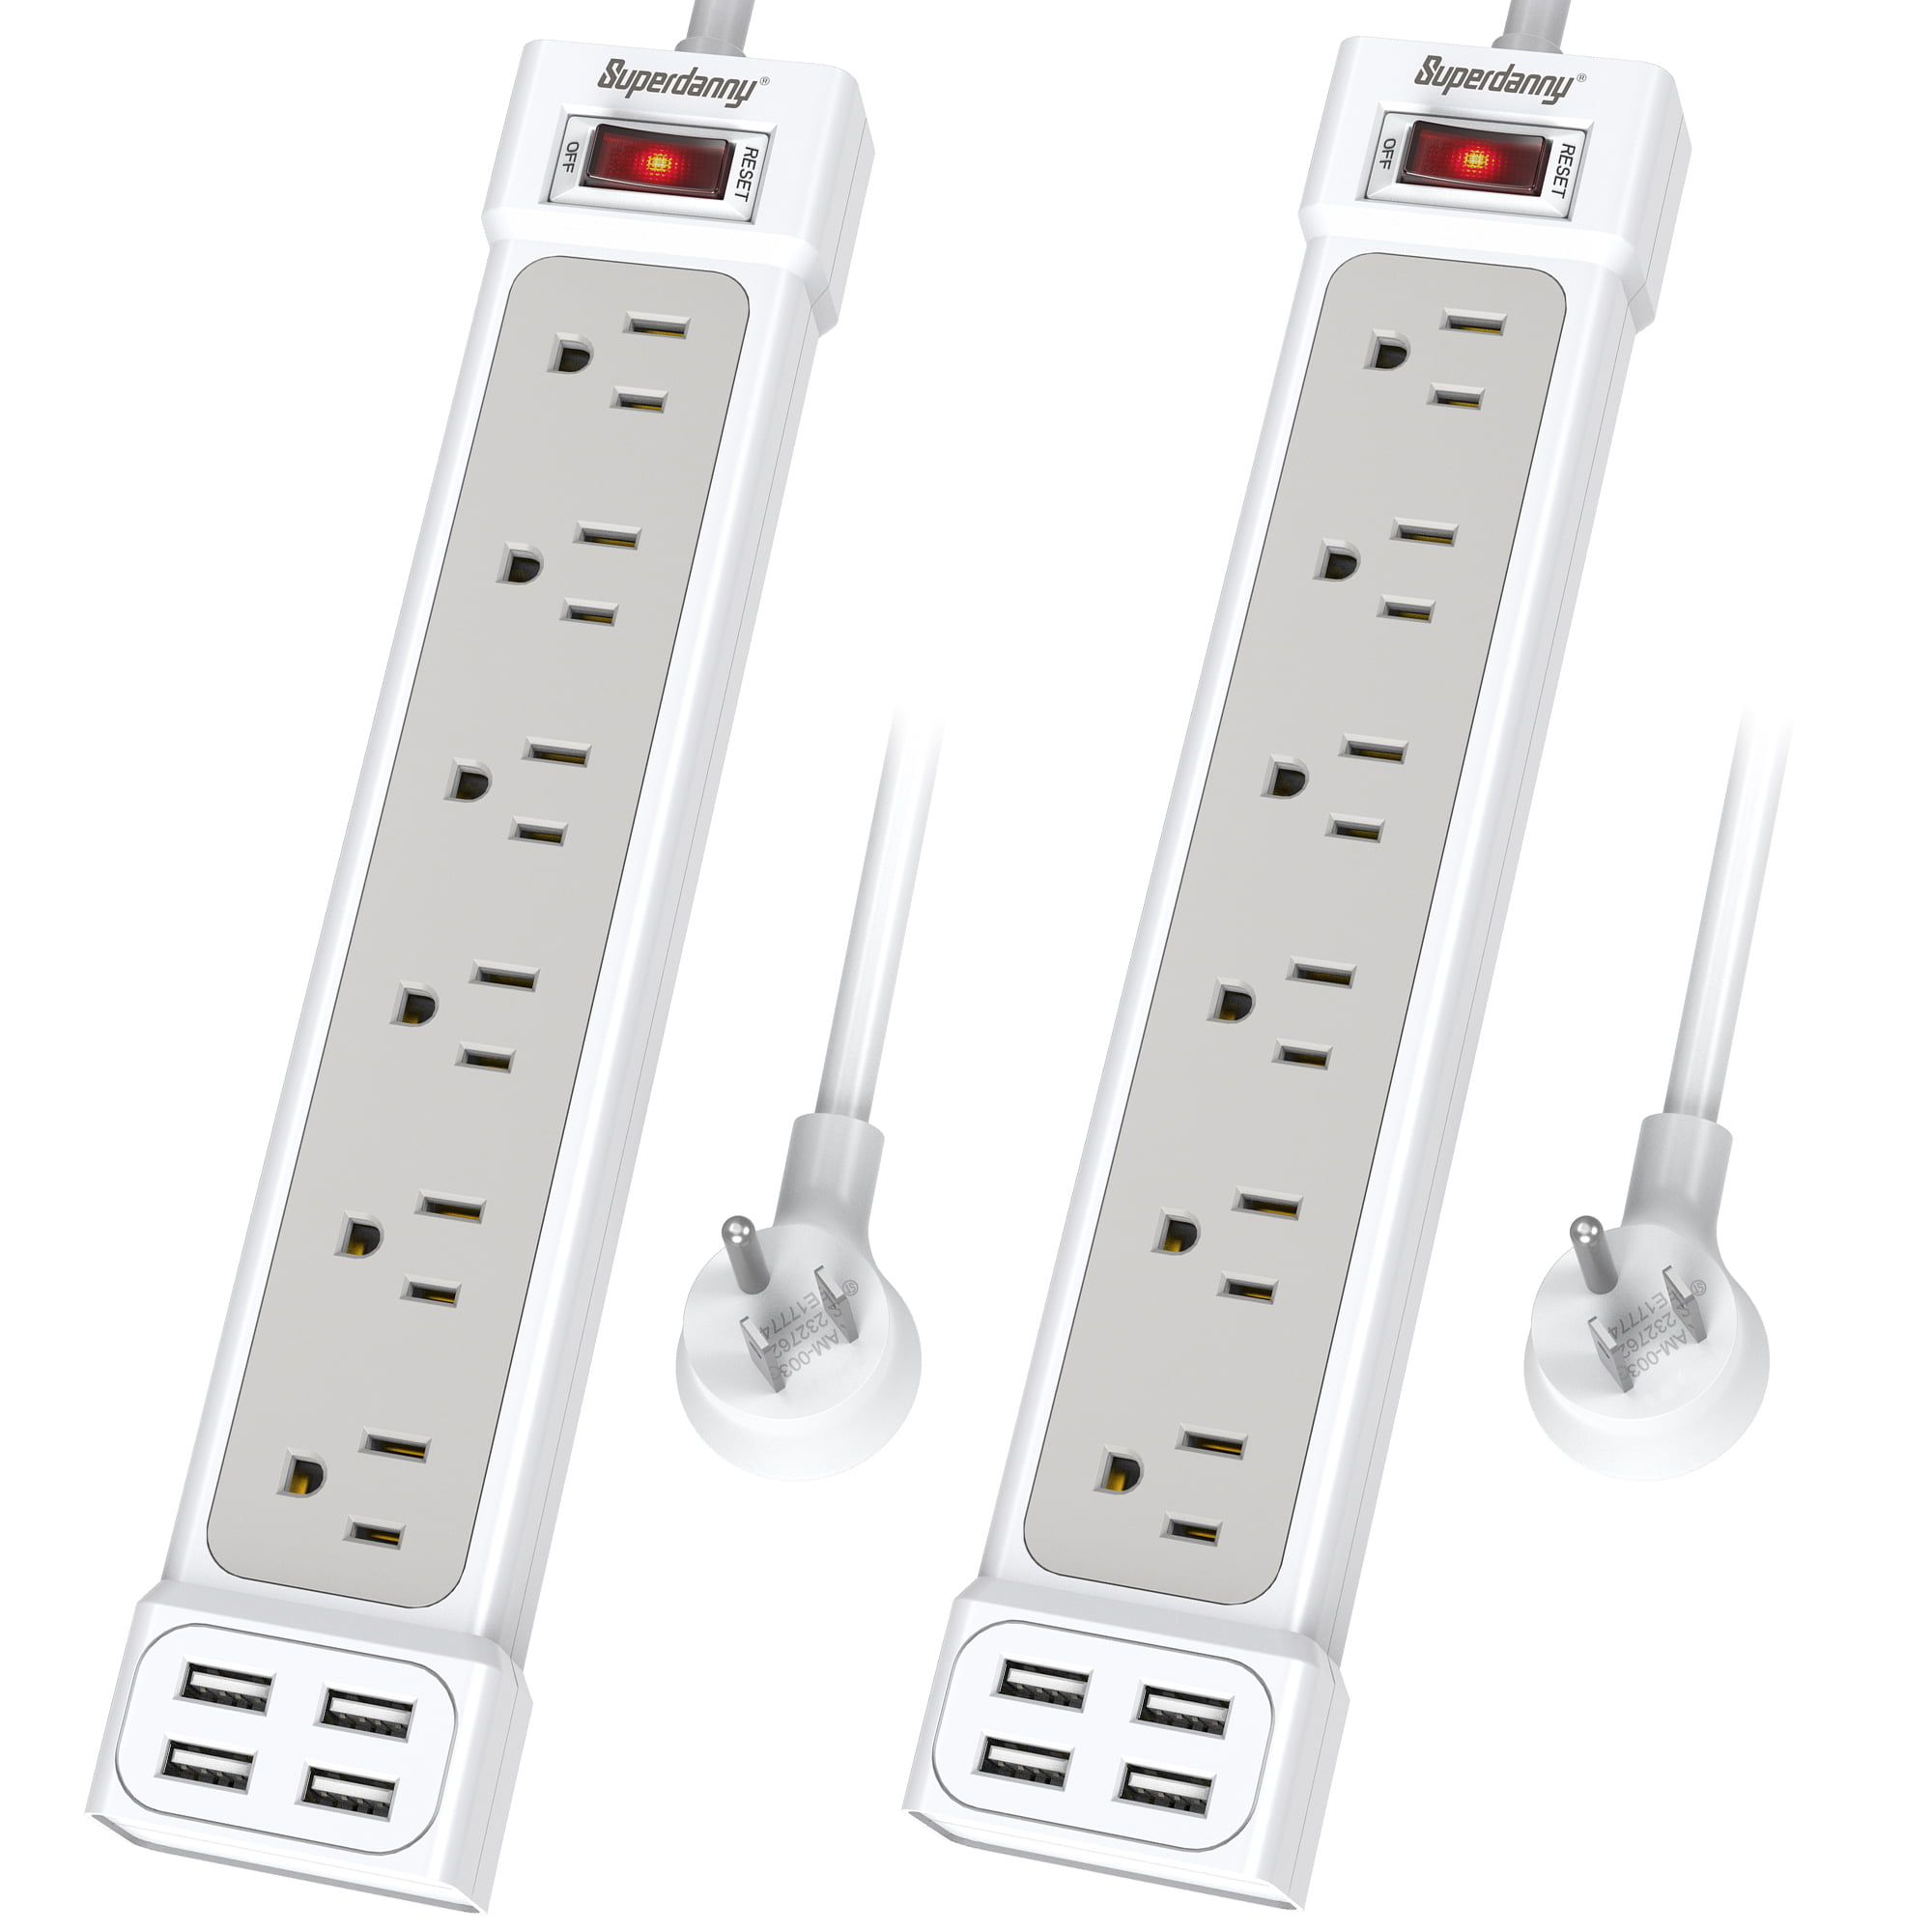 BYBON 6 Outlets Power Strip Surge Protector 10ft 14/3 AWG 300J UL-listed 8-Packs 